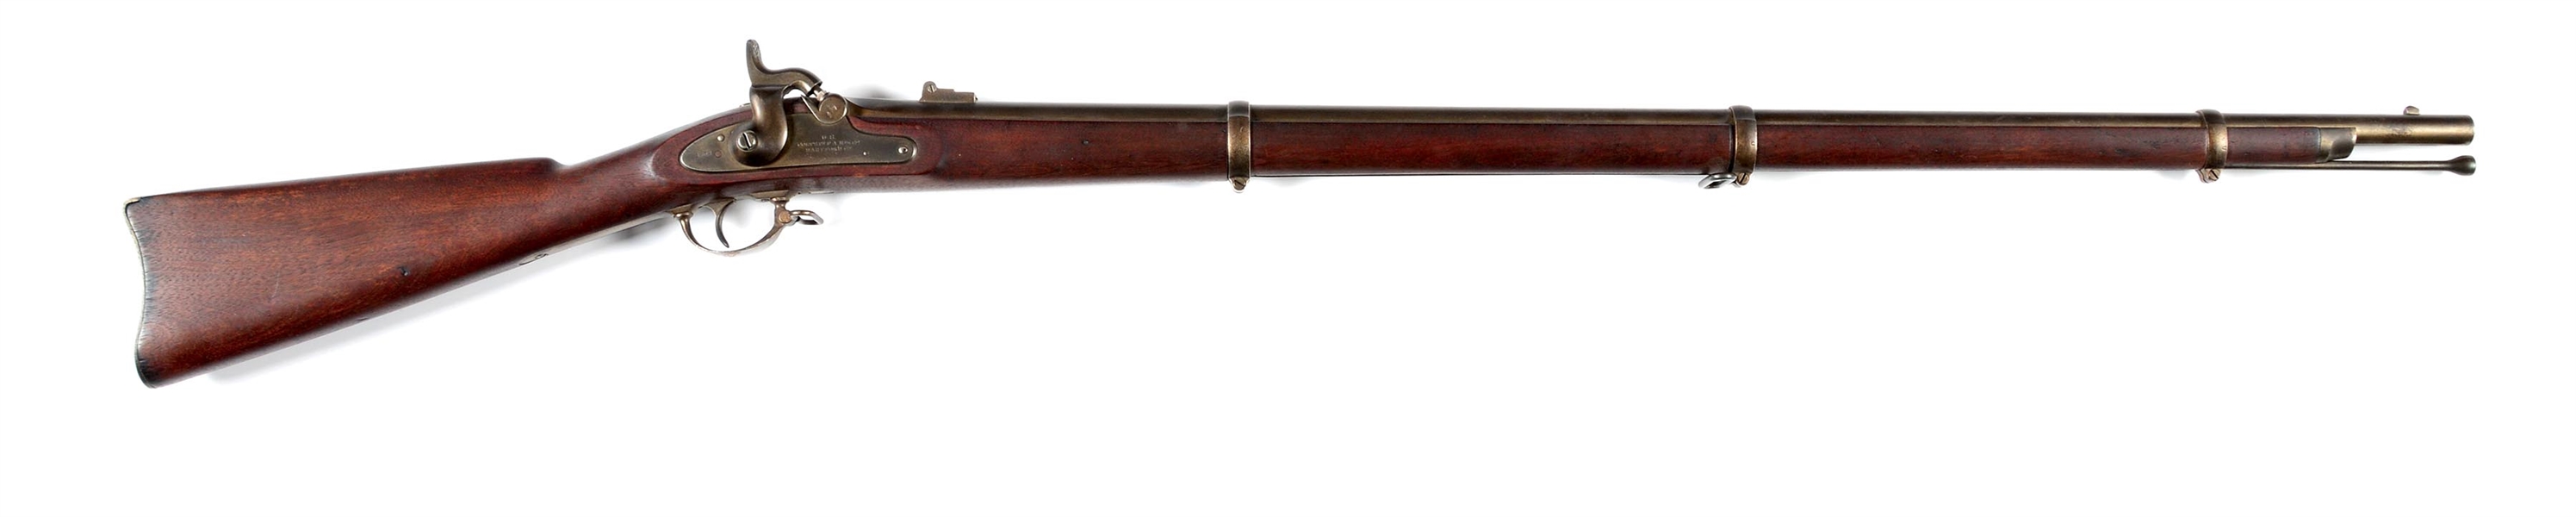 (A) NEW JERSEY MARKED COLT 1861 SPECIAL CONTRACT PERCUSSION RIFLE MUSKET.